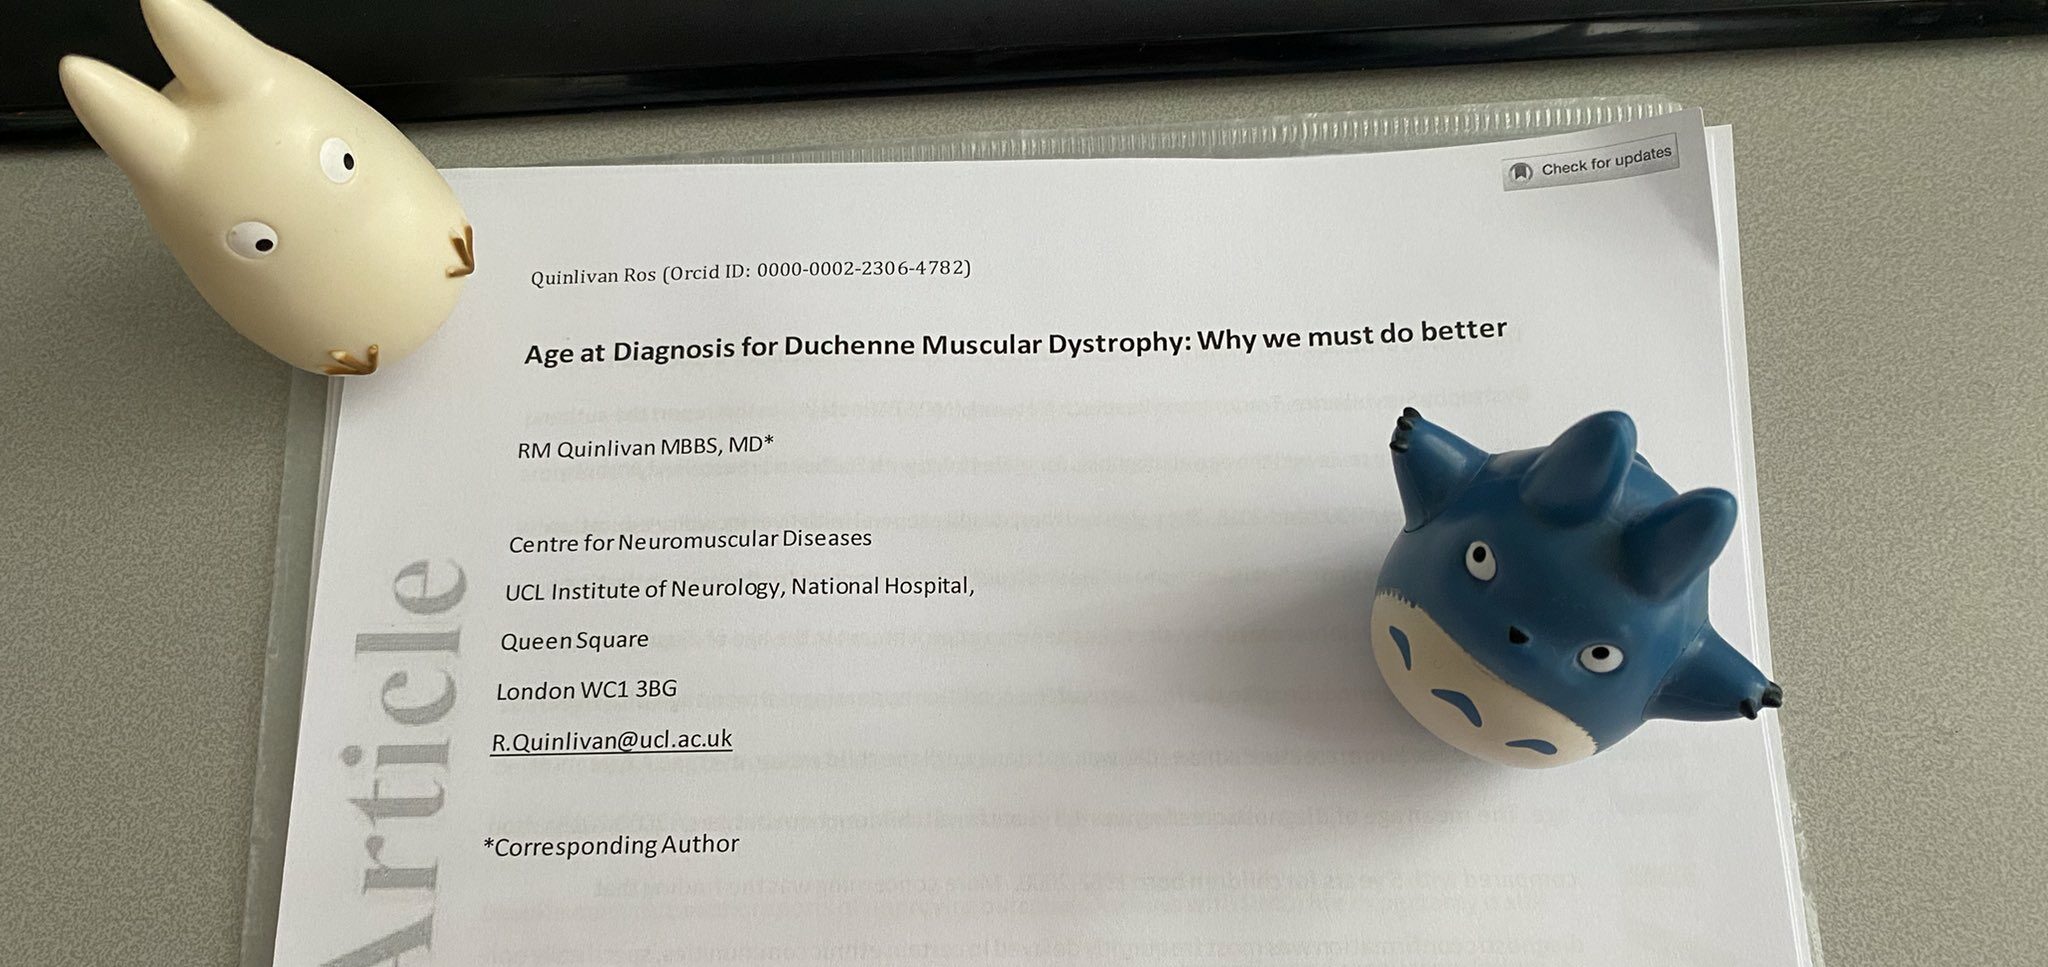 Age at diagnosis for Duchenne muscular dystrophy: Why we must do better